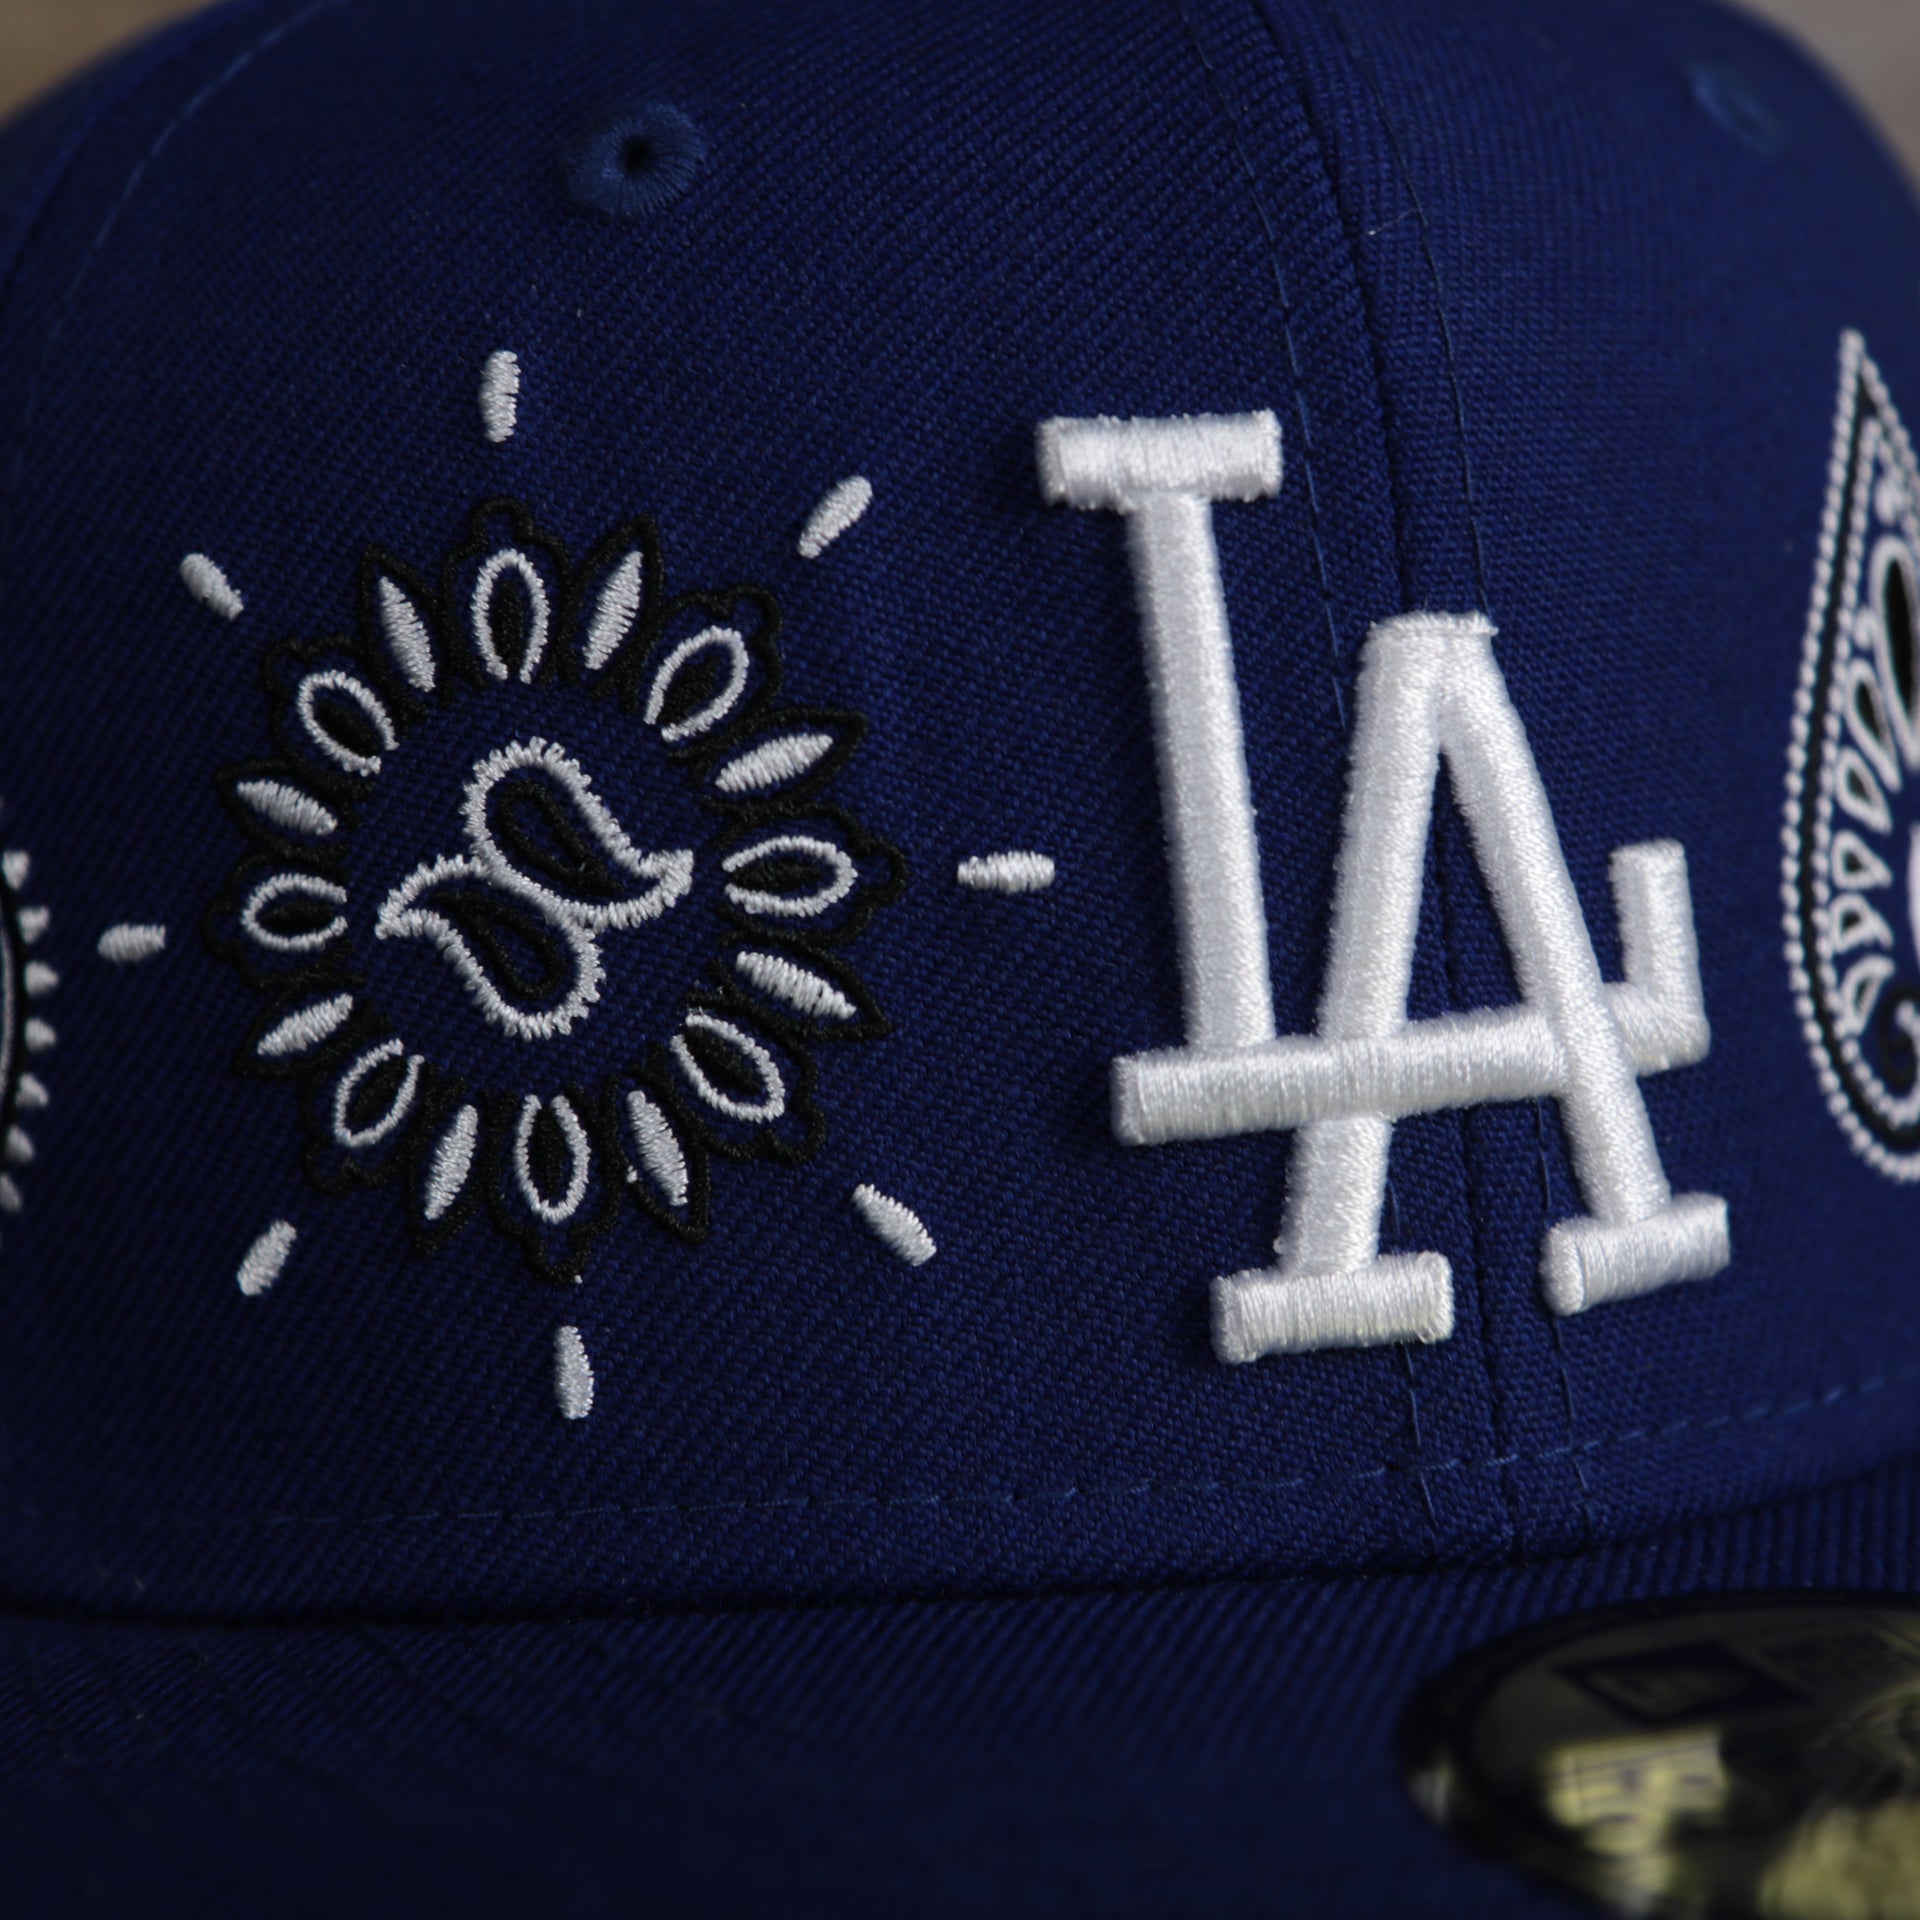 dodgers logo on the Los Angeles Lakers All Over Paisley Bandana Pattern Grey Bottom 5950 Fitted Cap | Blue